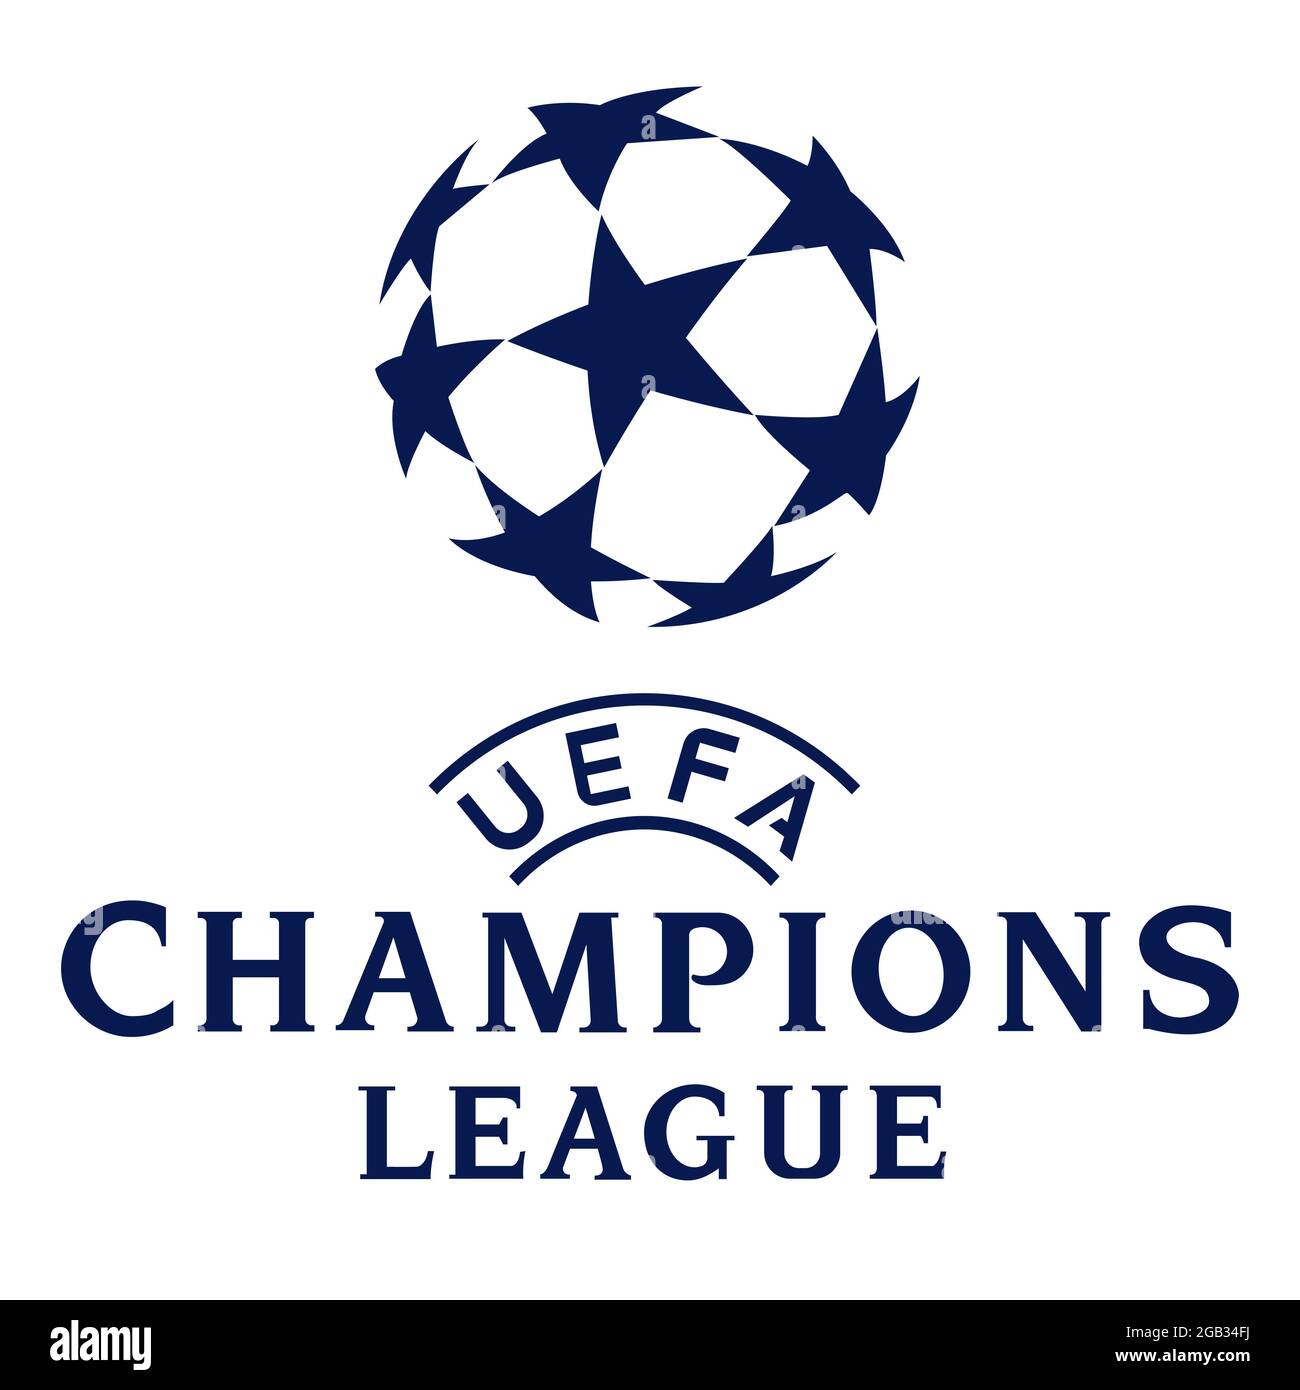 Champions league logo Cut Out Stock Images & Pictures - Alamy